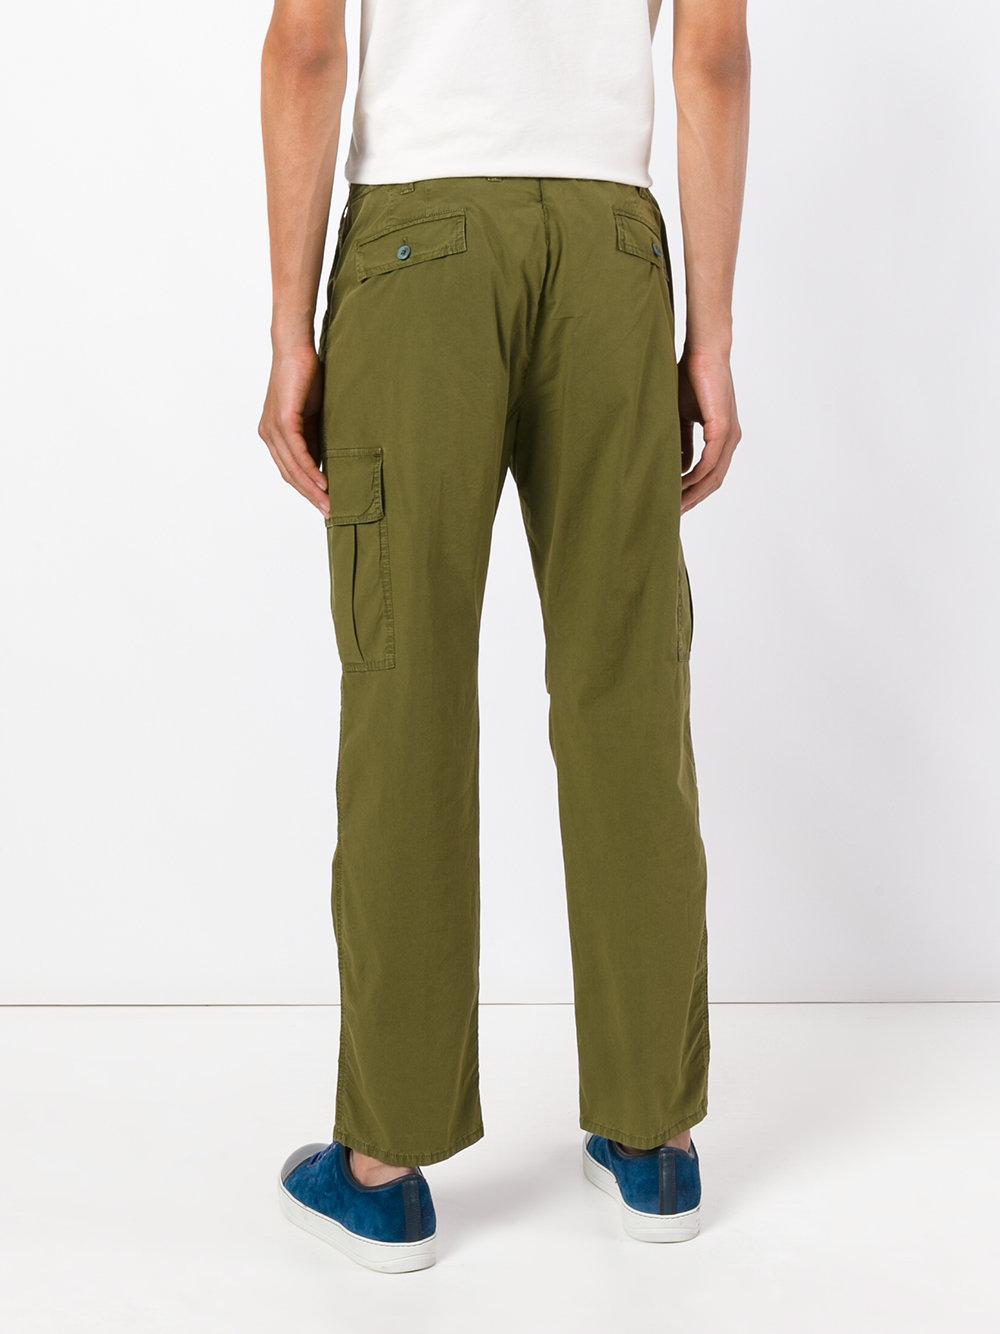 PT01 Cotton Loose Fit Pants in Green for Men - Lyst